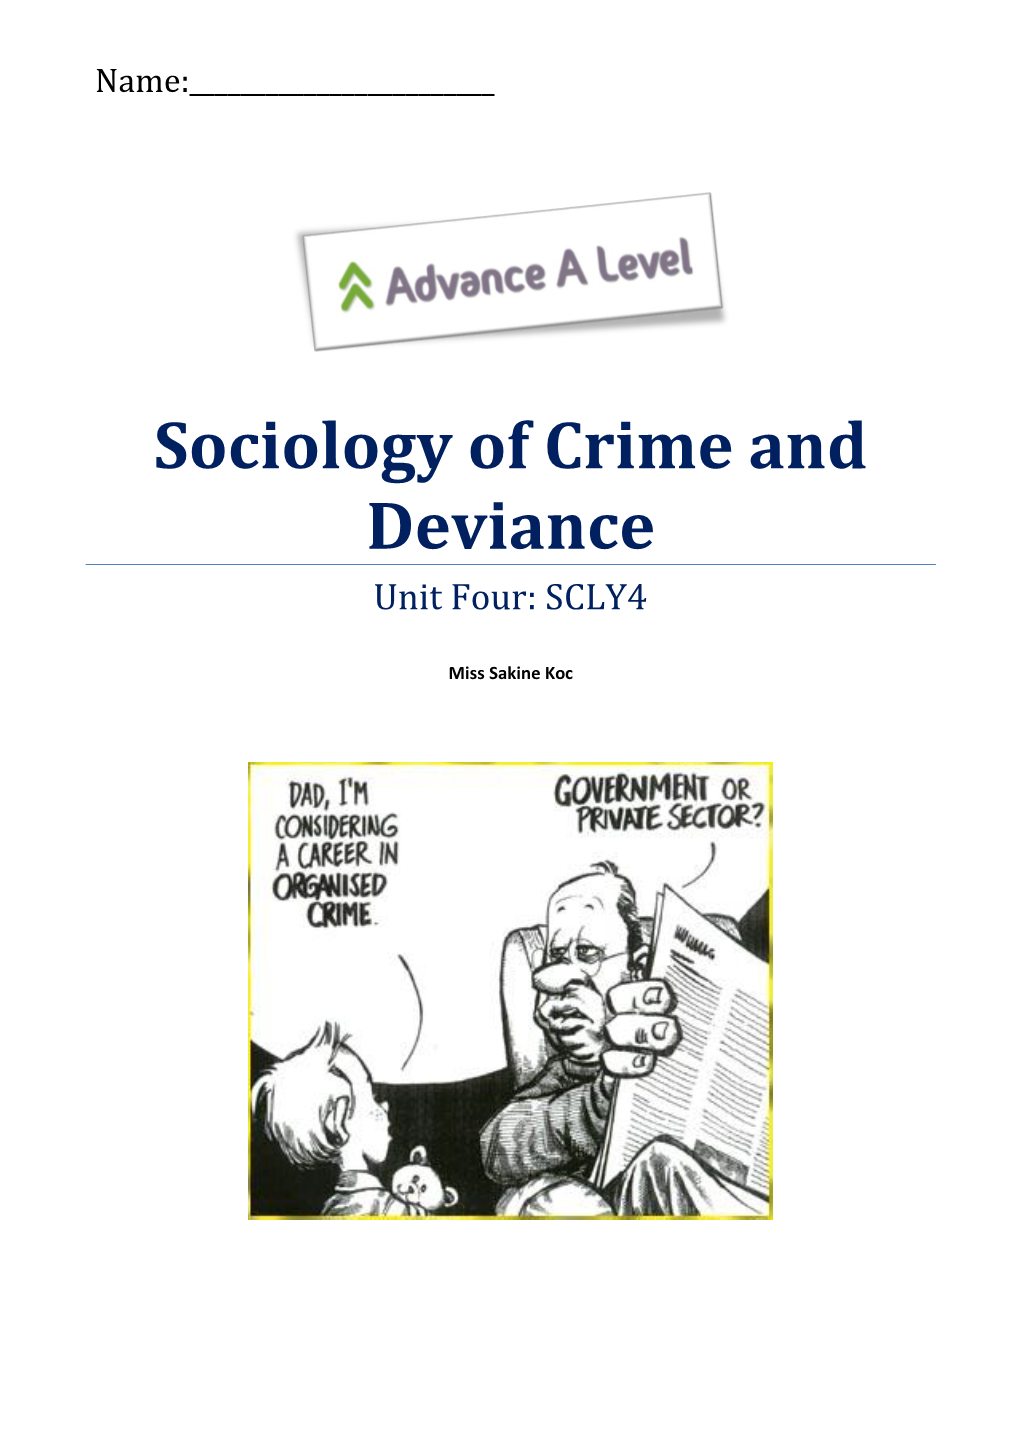 Sociology of Crime and Deviance Unit Four: SCLY4